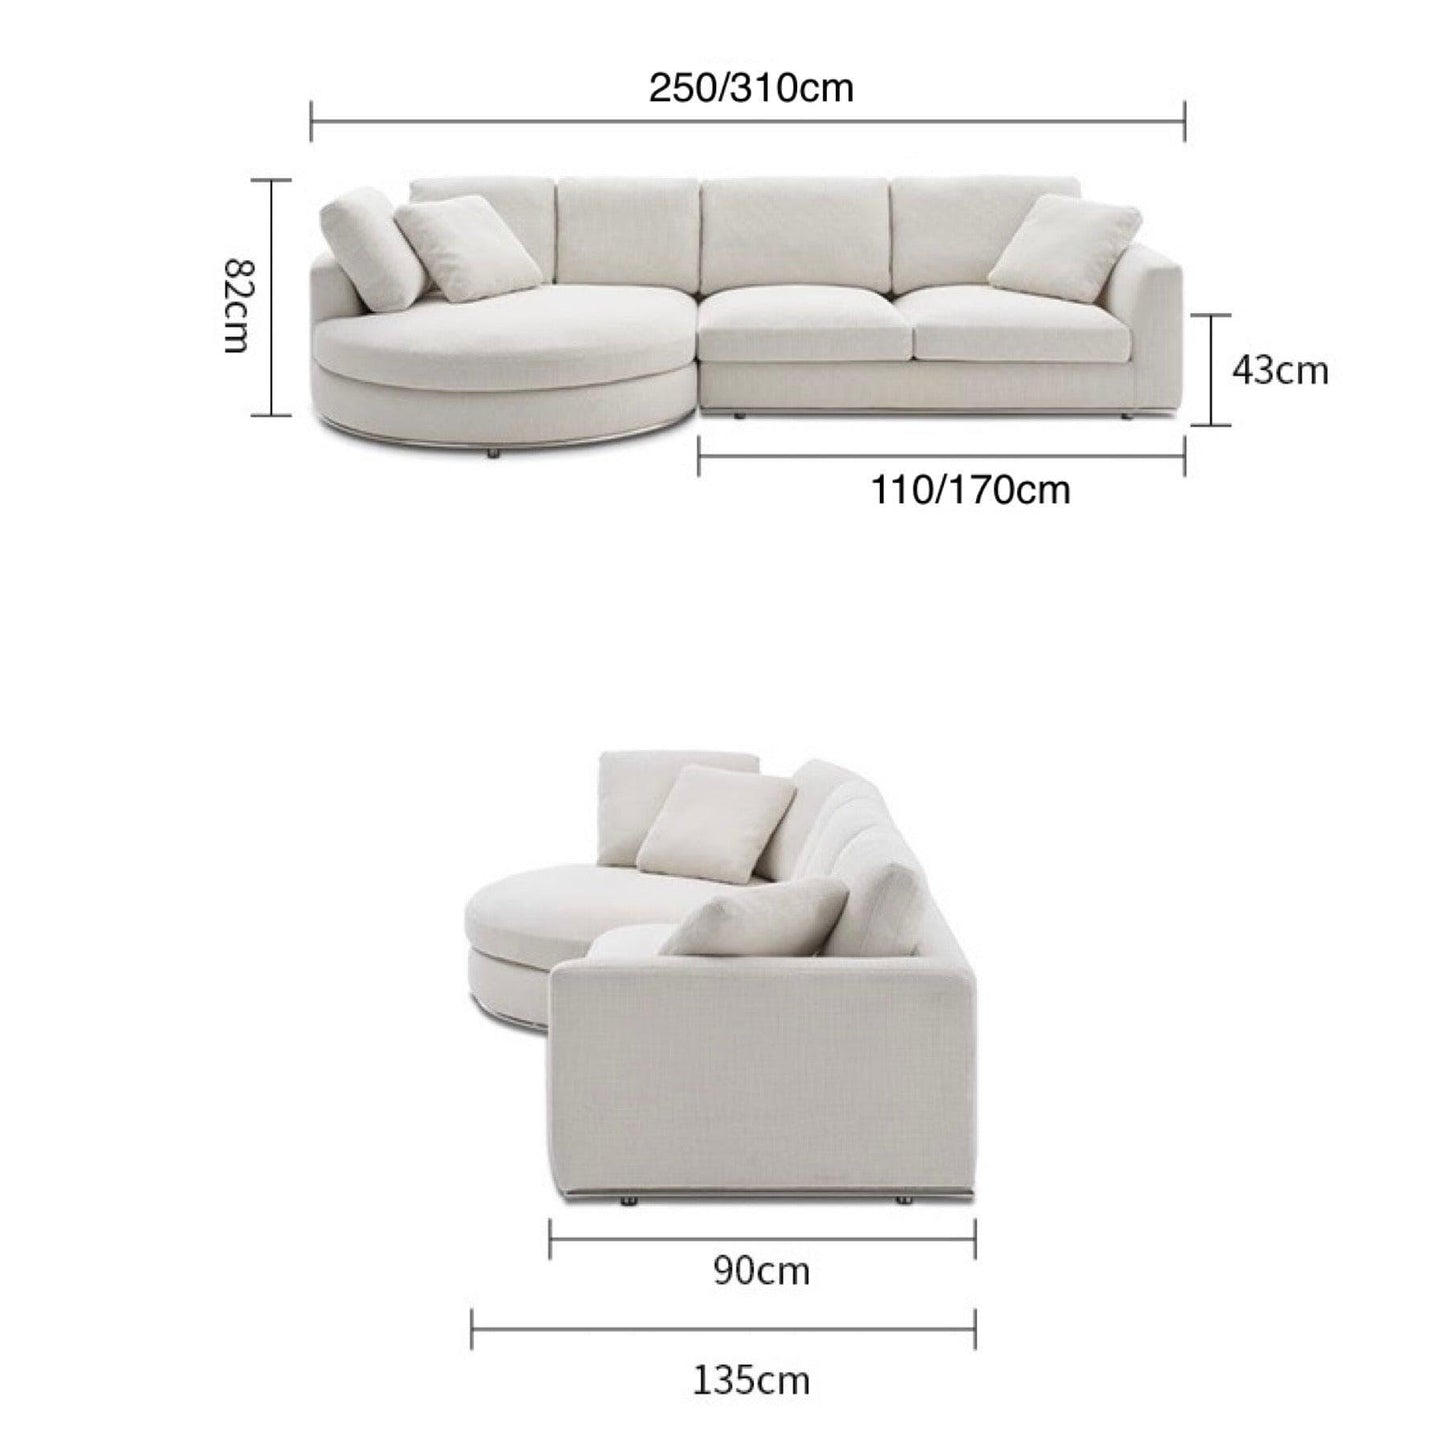 Home Atelier Cotton Linen Fabric / Length 310cm with curve chaise/ without metal base / Cream Bella Designer Sectional Round Chaise Sofa